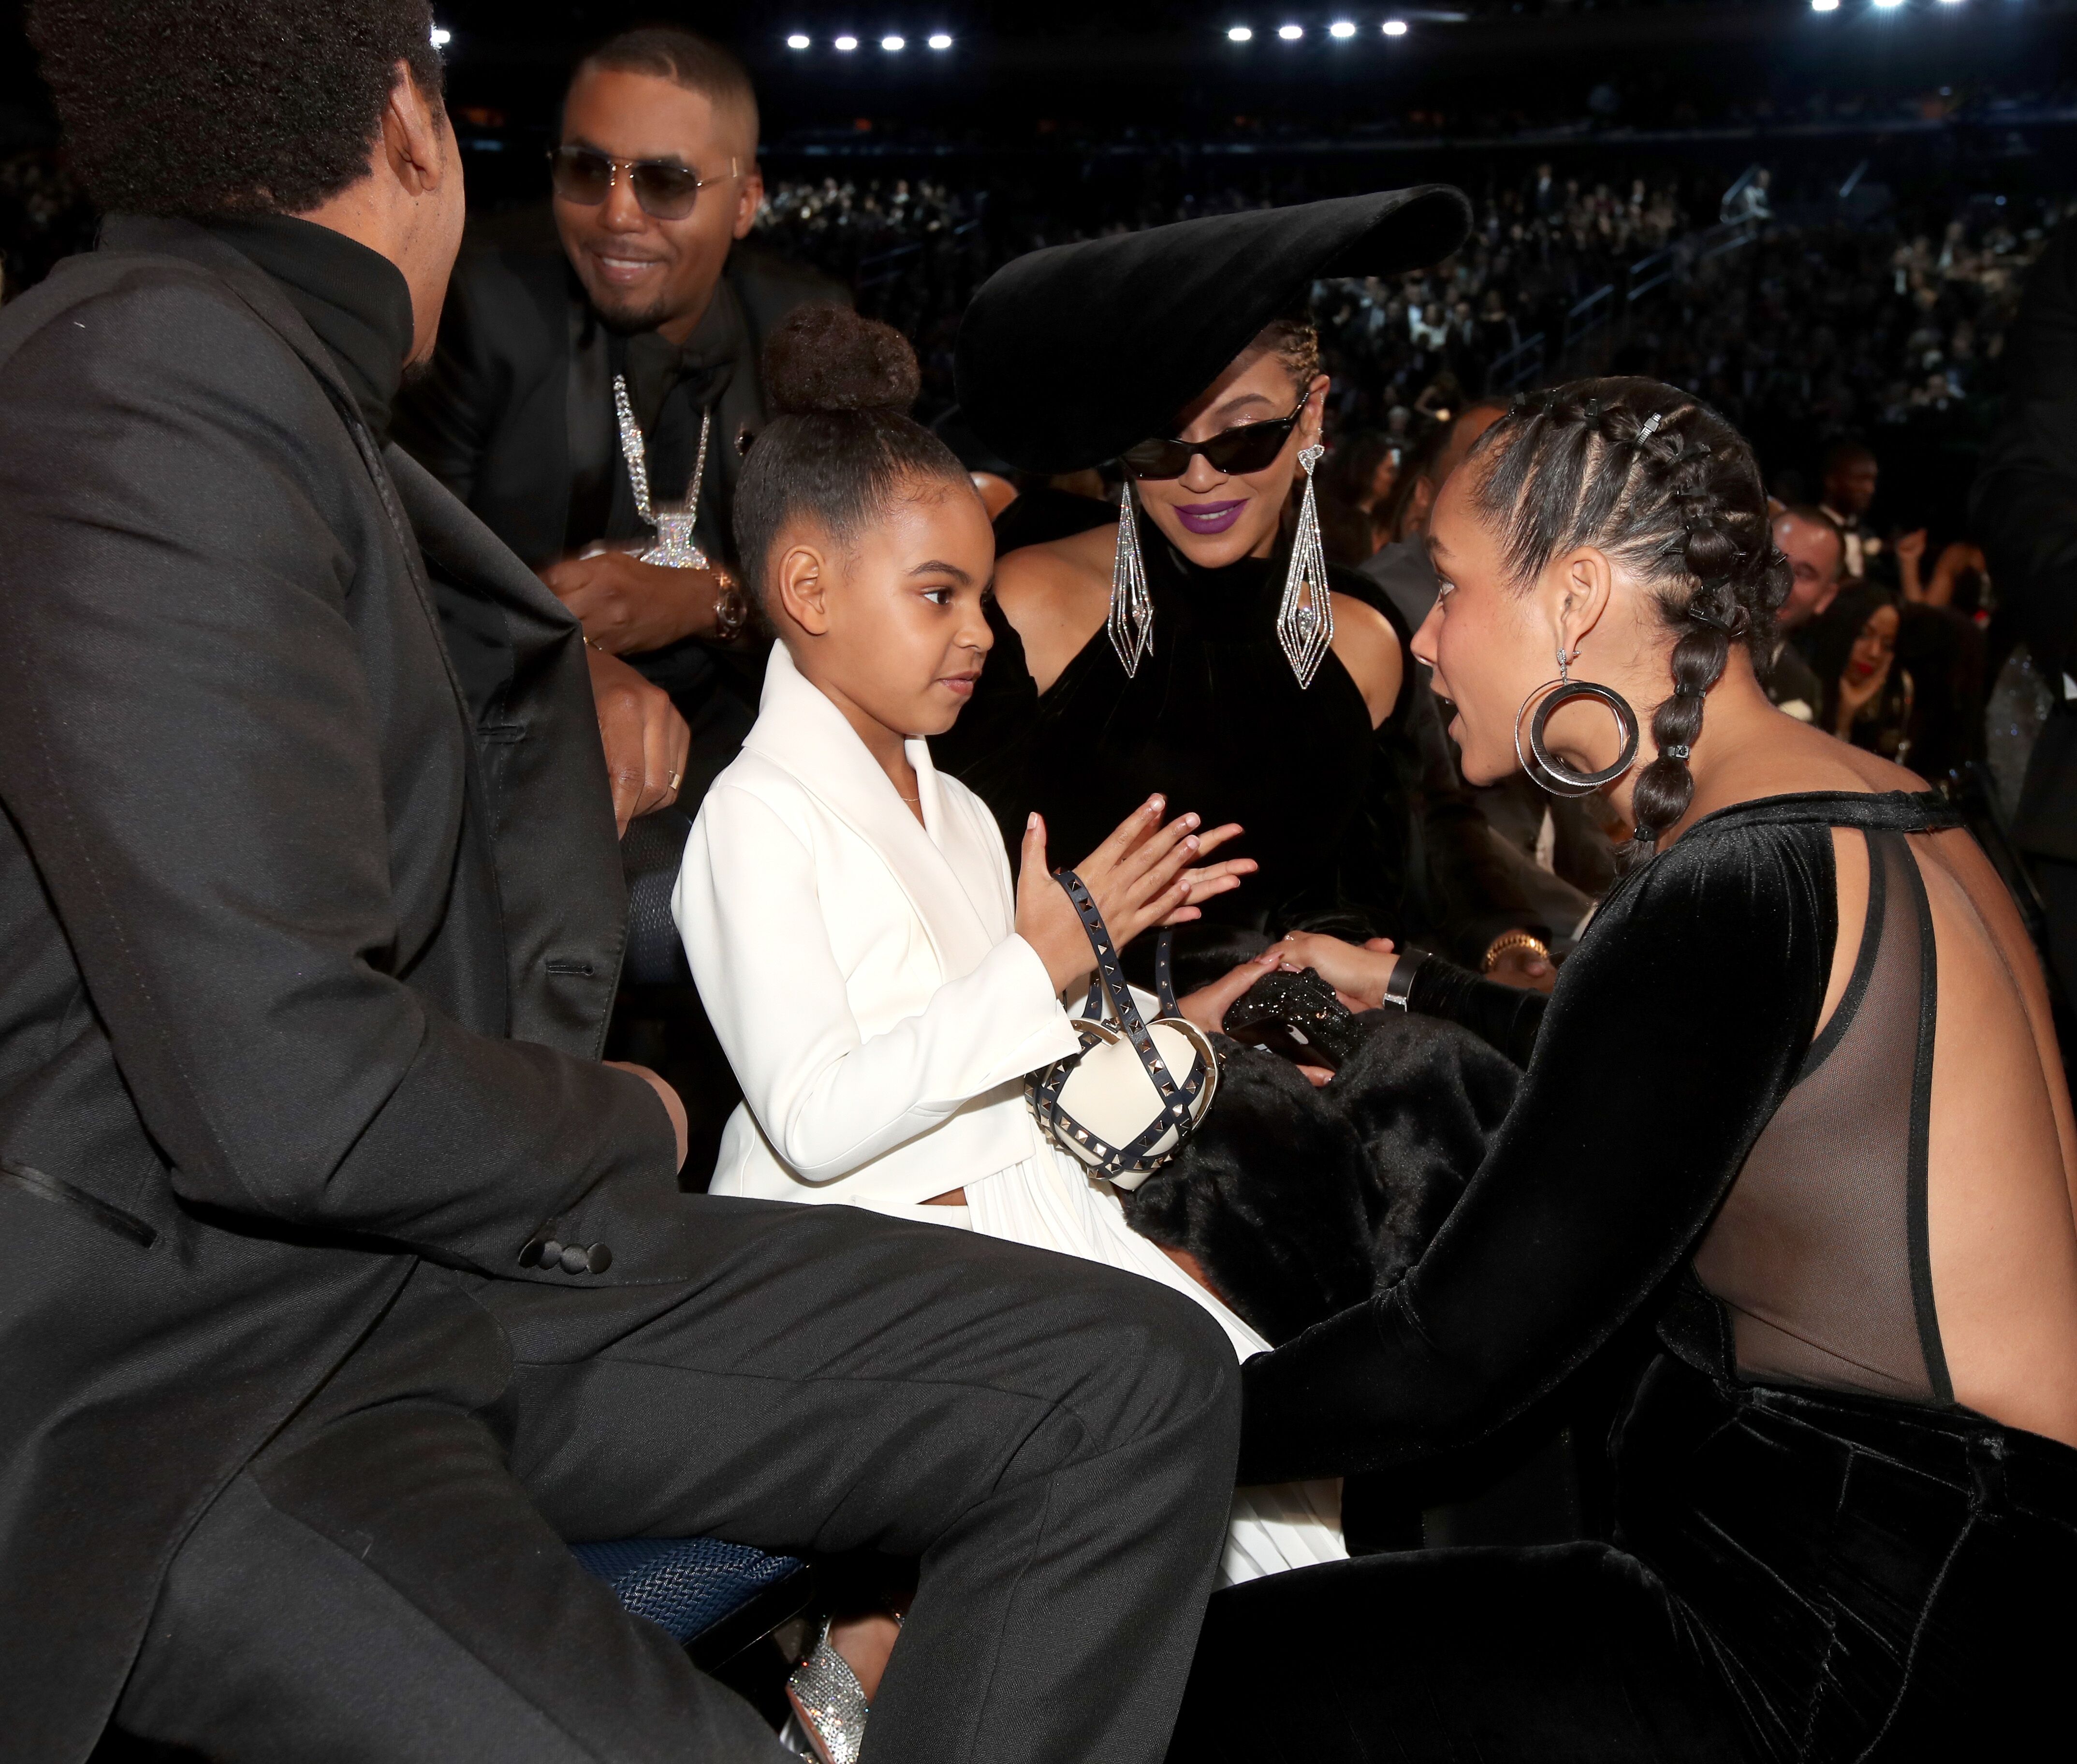 Blue Ivy meets Alicia Keys, alon with her parents Beyoncé and Jay Z  at the 60th Annual GRAMMY Awards in New York in 2018 | Source Getty Images